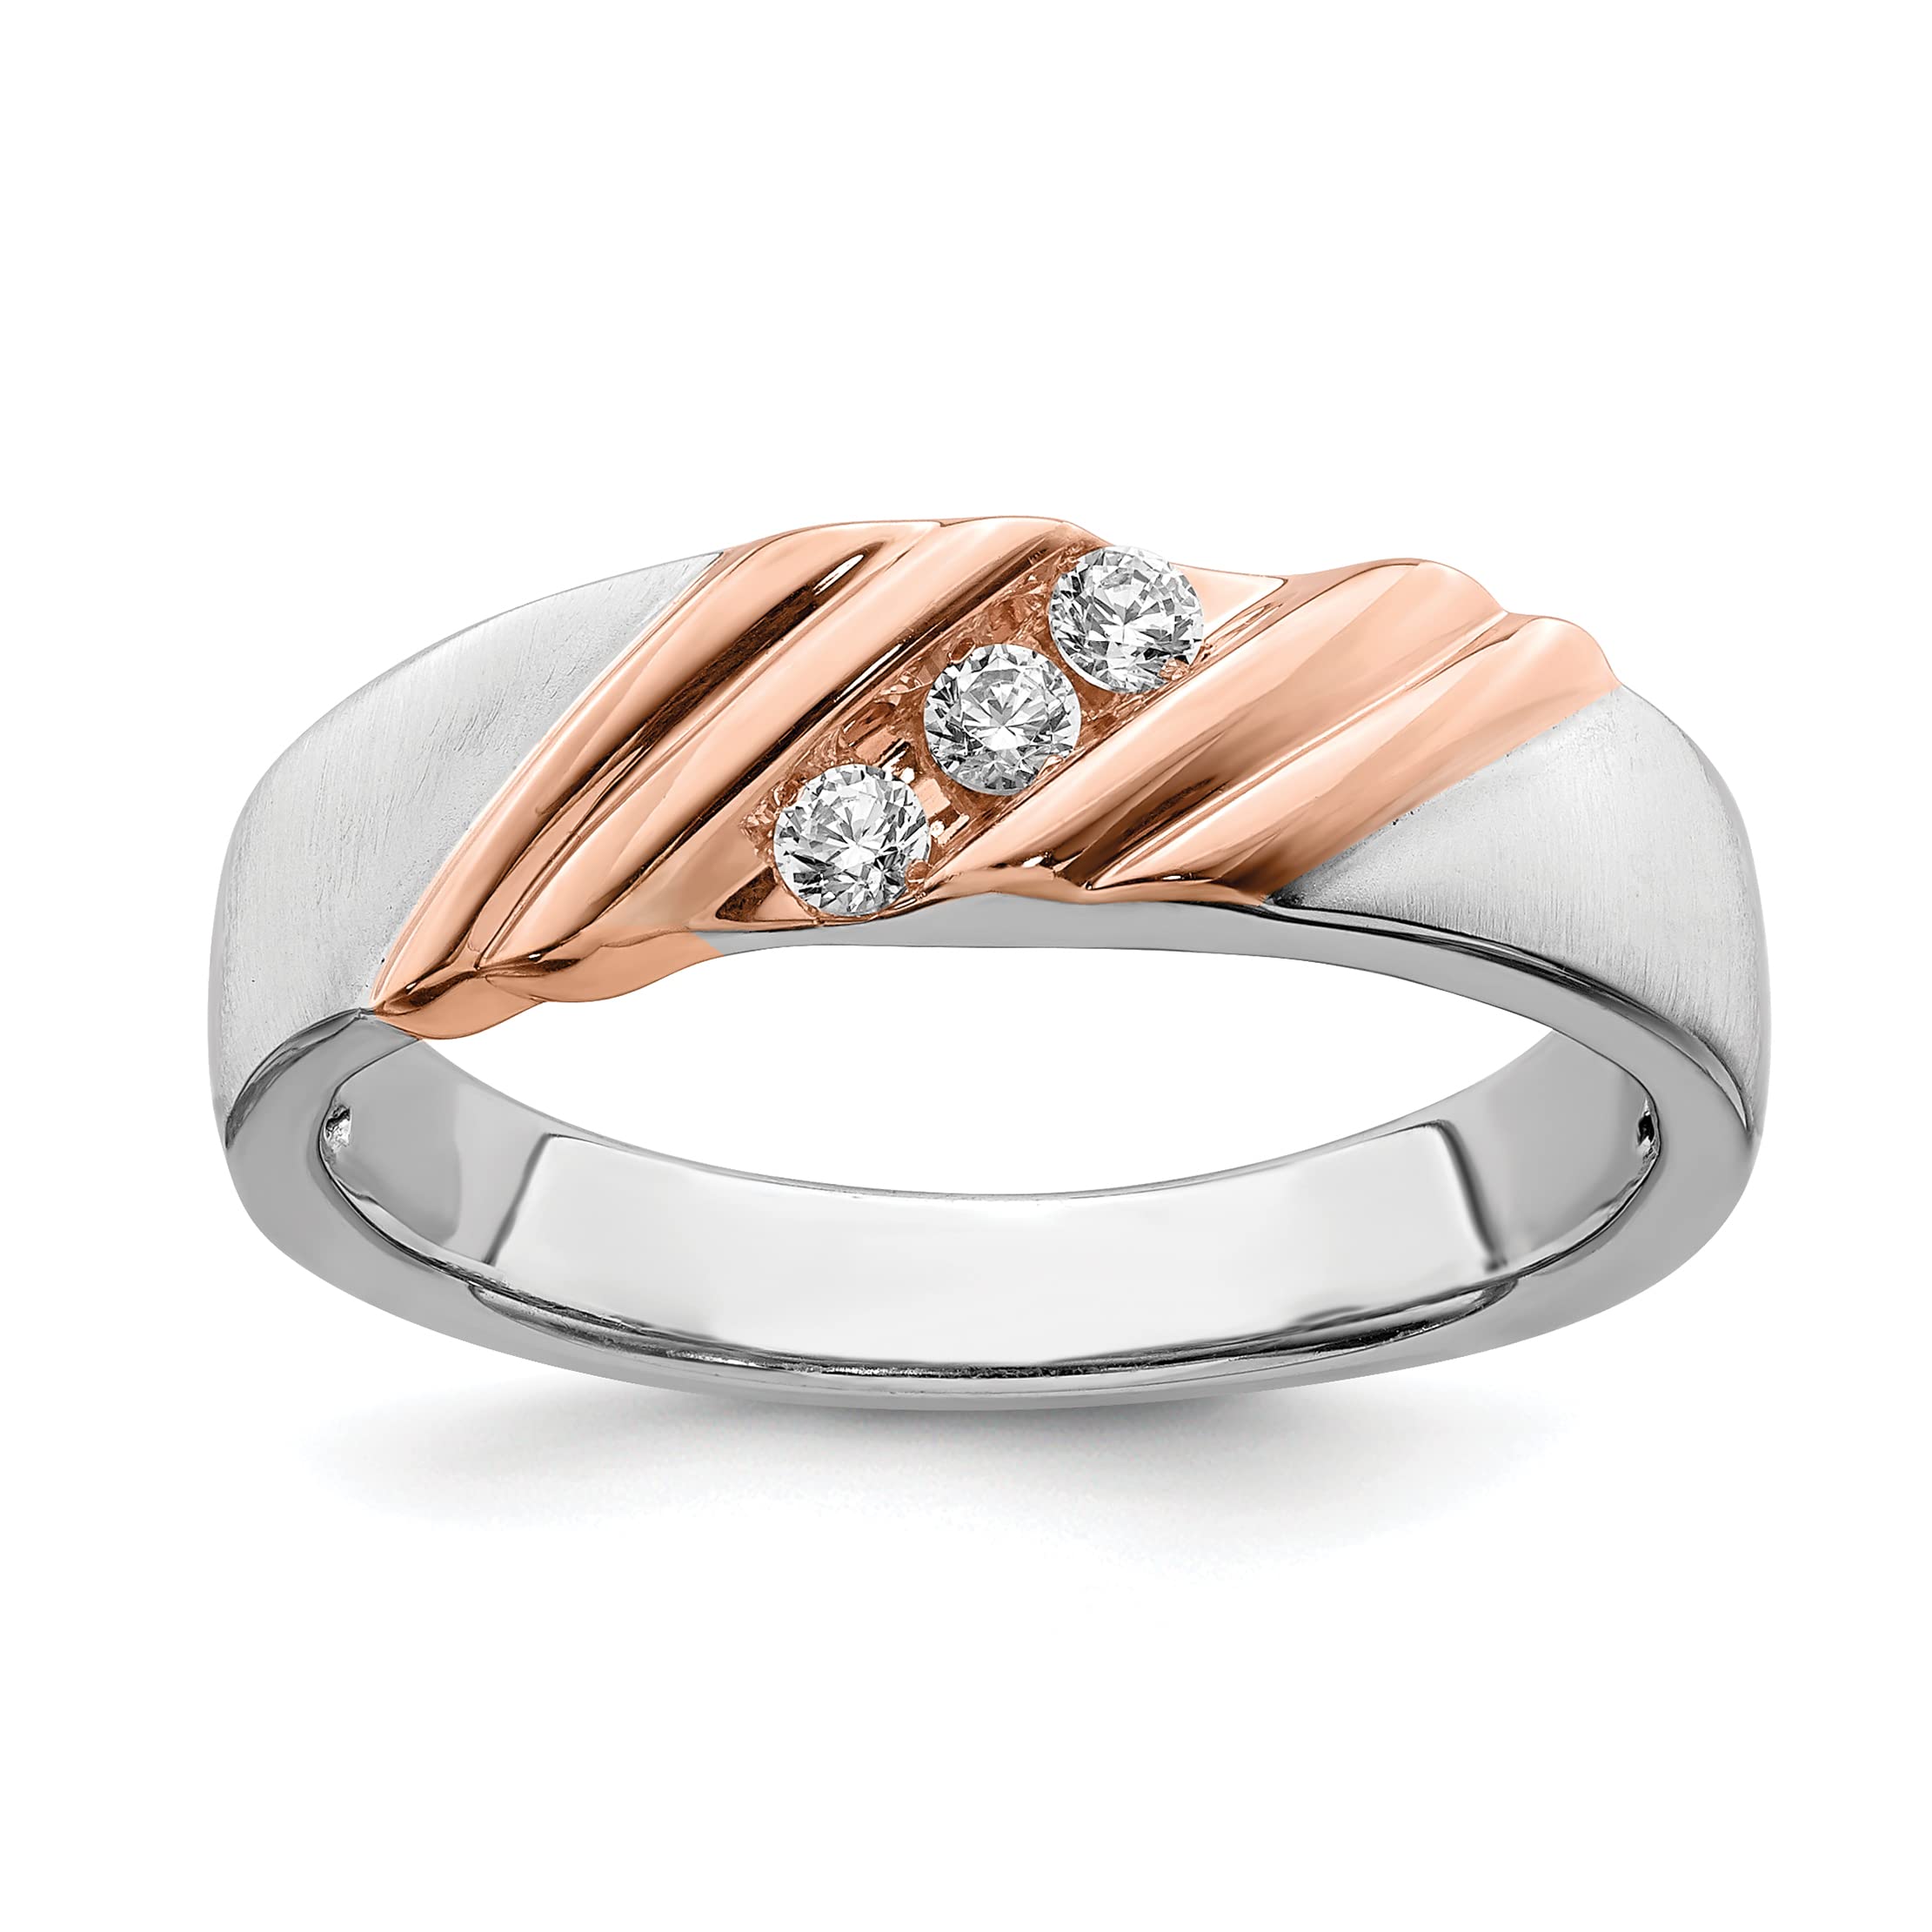 Jewels By Lux Solid 14k White and Rose Two Tone Gold 3-Stone 1/6 carat Diamond Complete Mens Wedding Ring Band Available in Size 7 to 11 (Band Width: 3.66 to 6.26 mm)